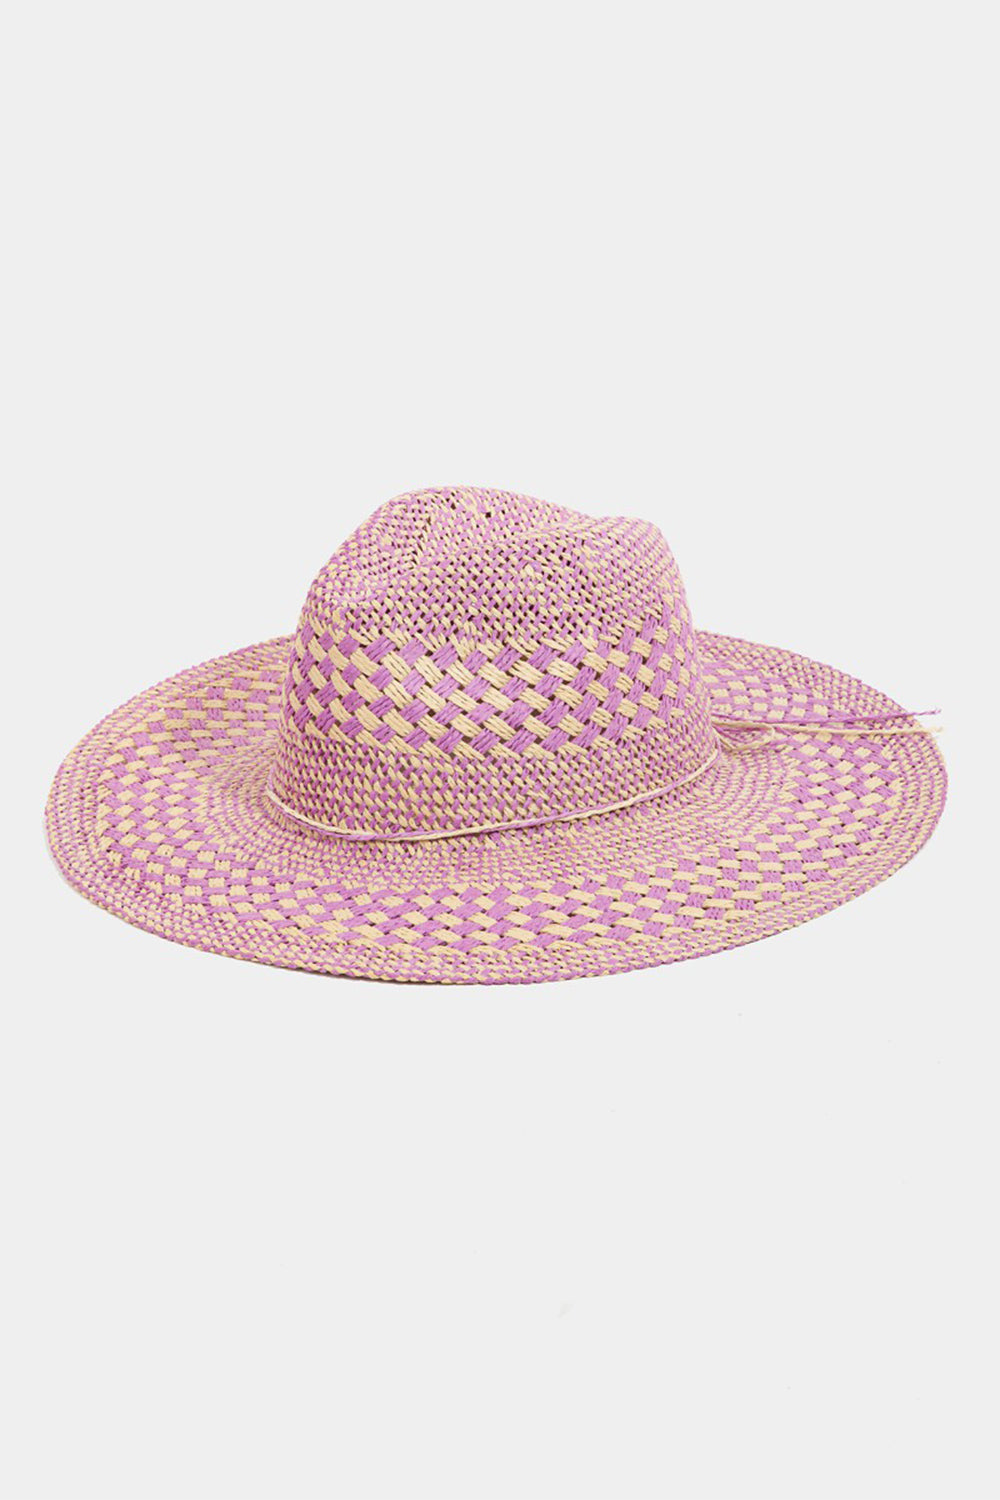 Fame Checkered Straw Weave Sun Hat PU One Size